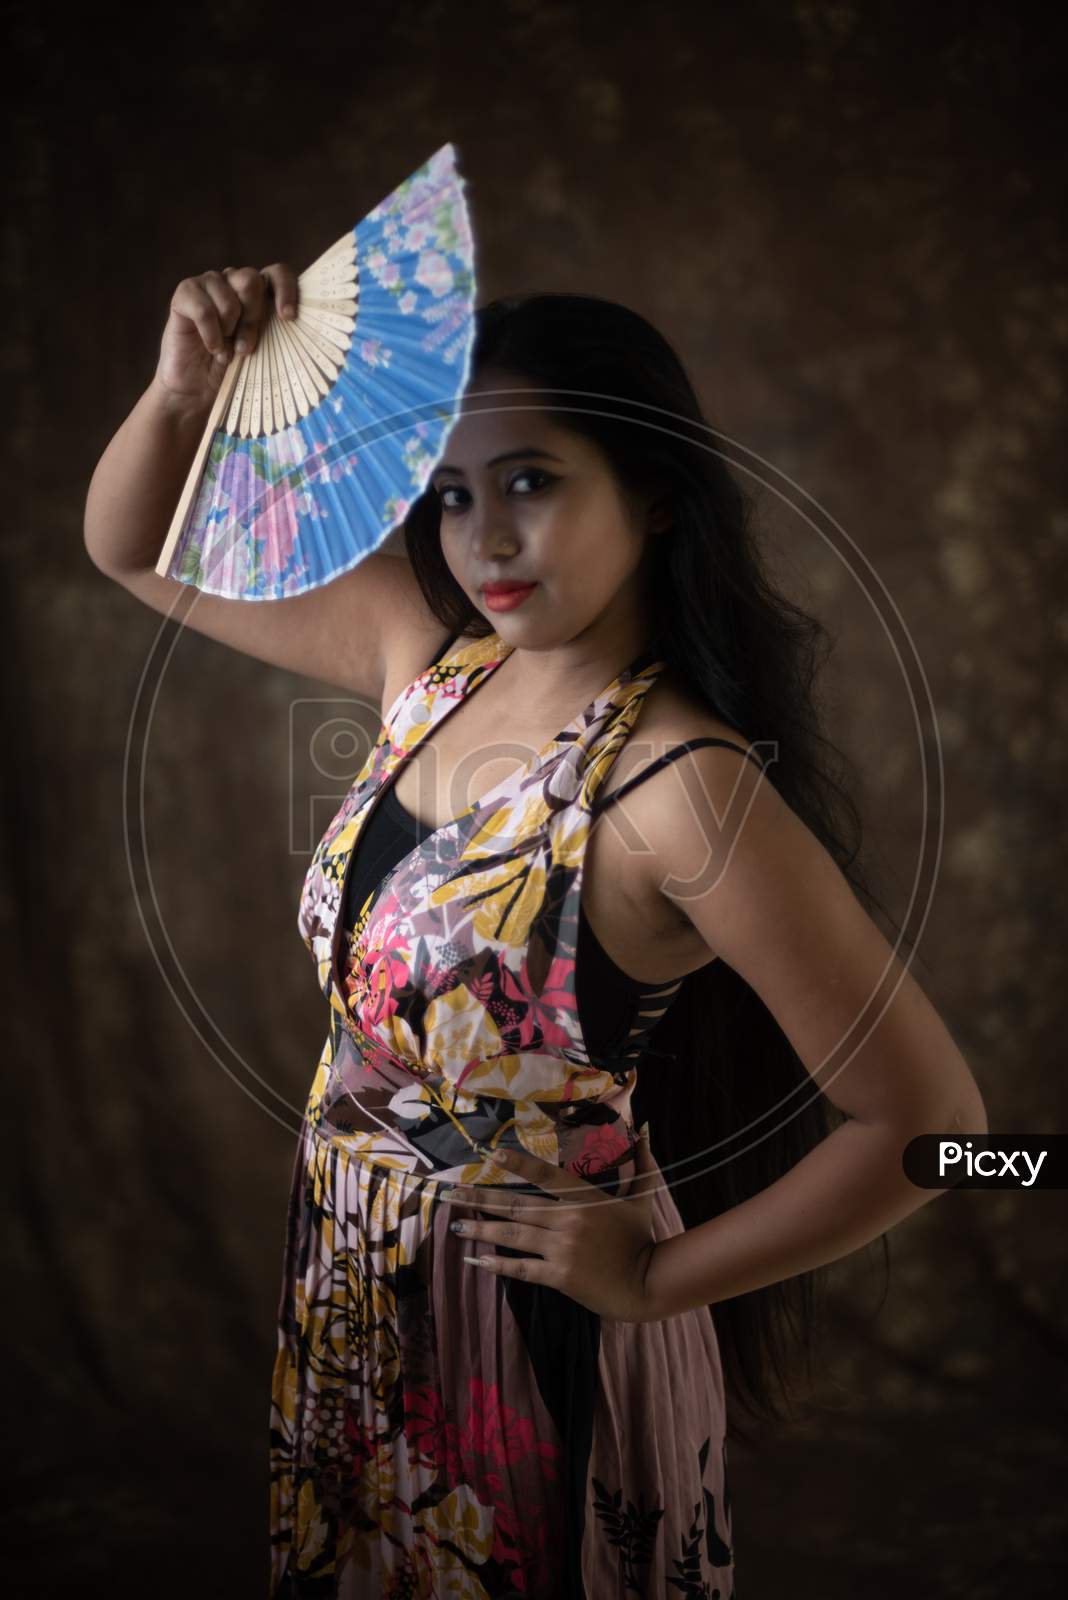 Studio Portrait Of An Young Indian Girl In Western Backless Dress In Front Of Textured Background. Fashion Portrait Photography